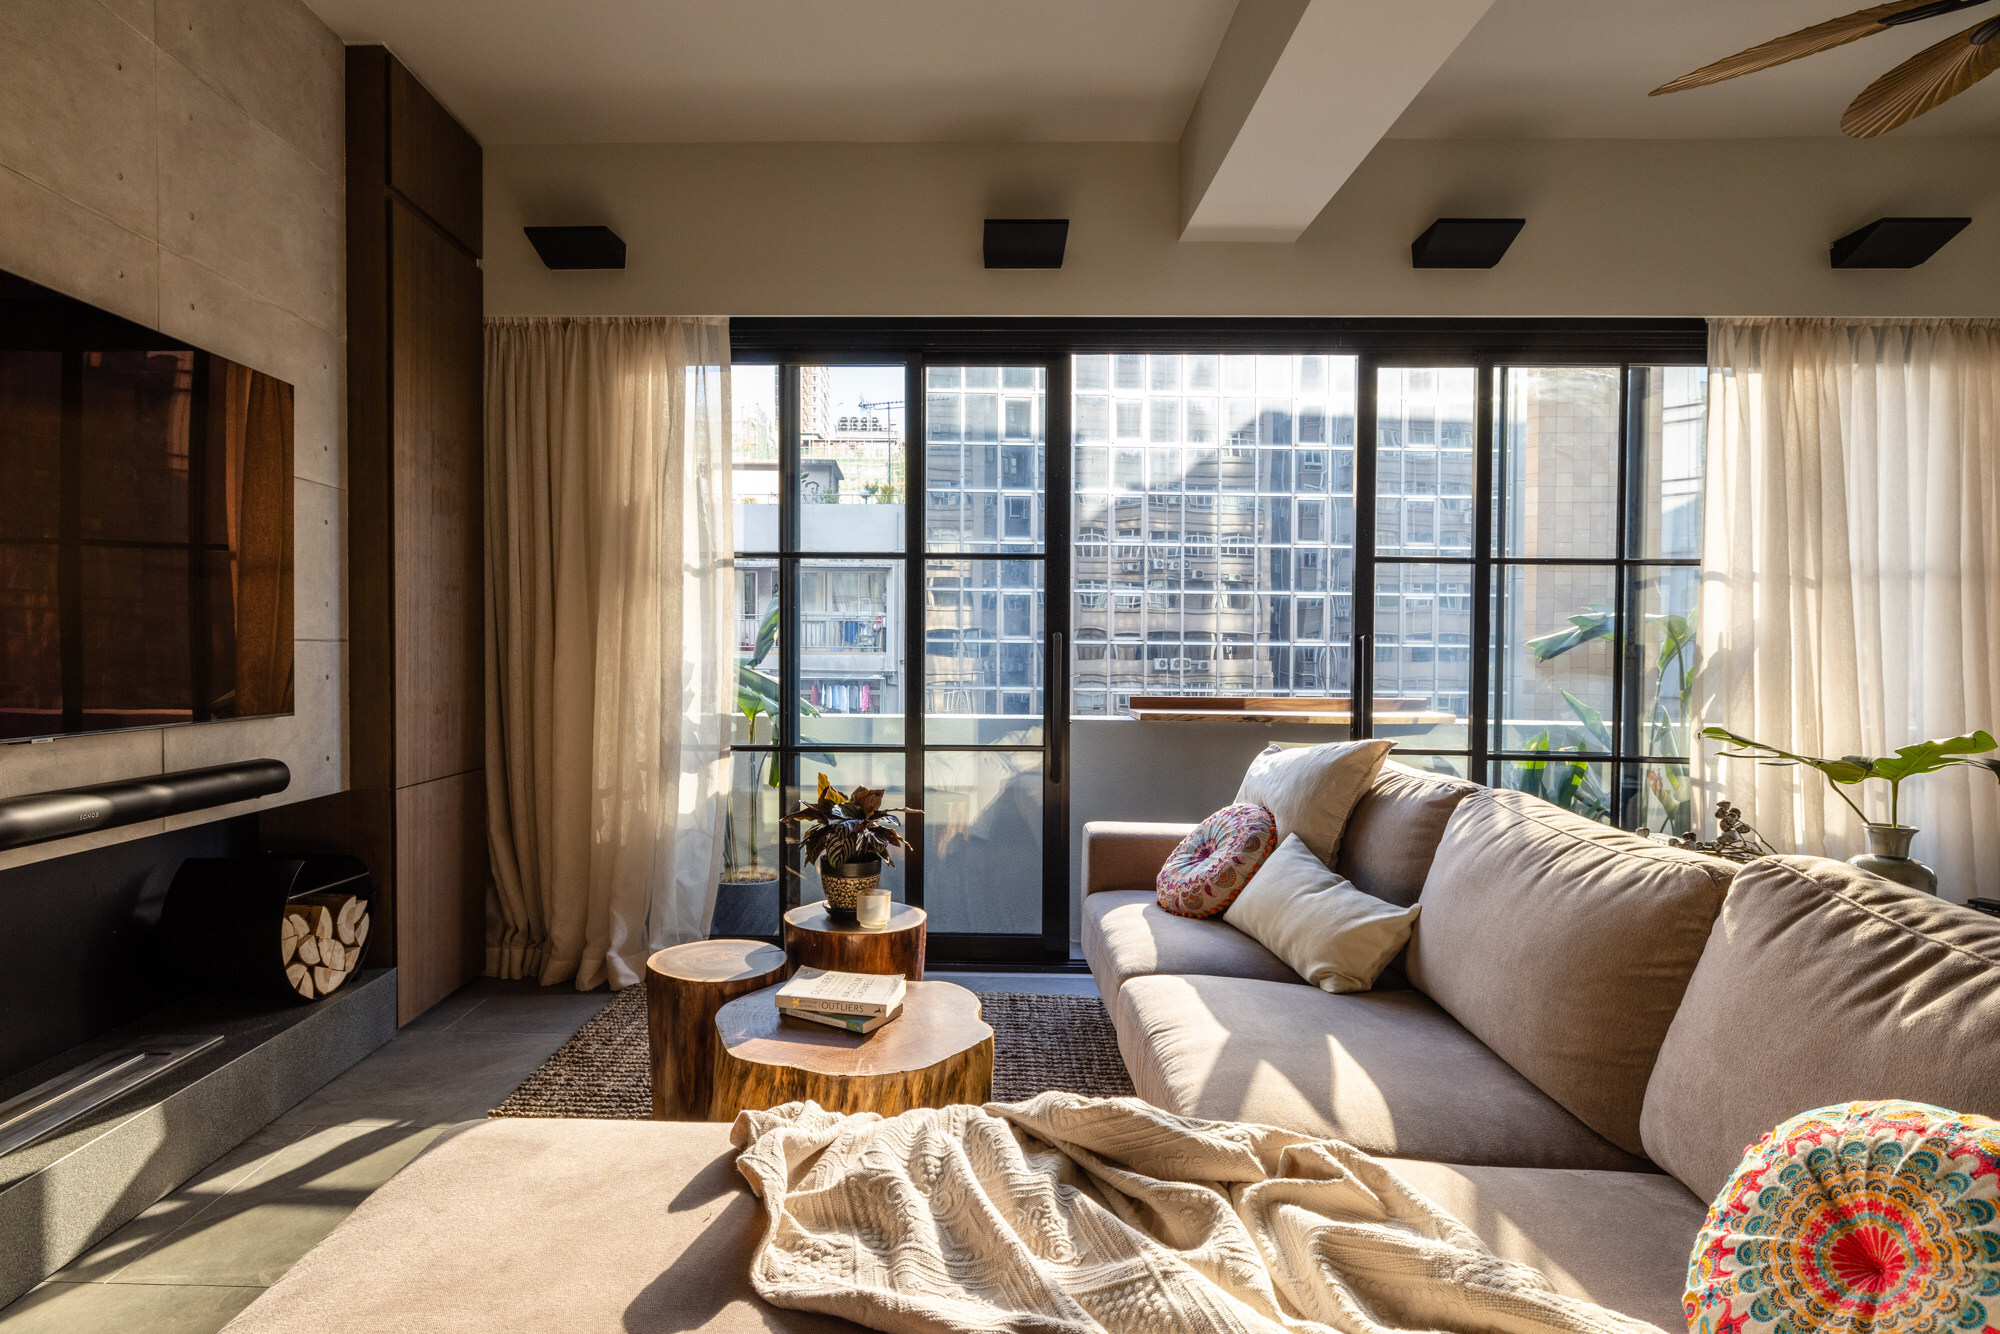 This Tsim Sha Tsui flat combines elements of Bali, Japan and New York to create a warm, welcoming, bohemian space. Photo: Tracy Wong